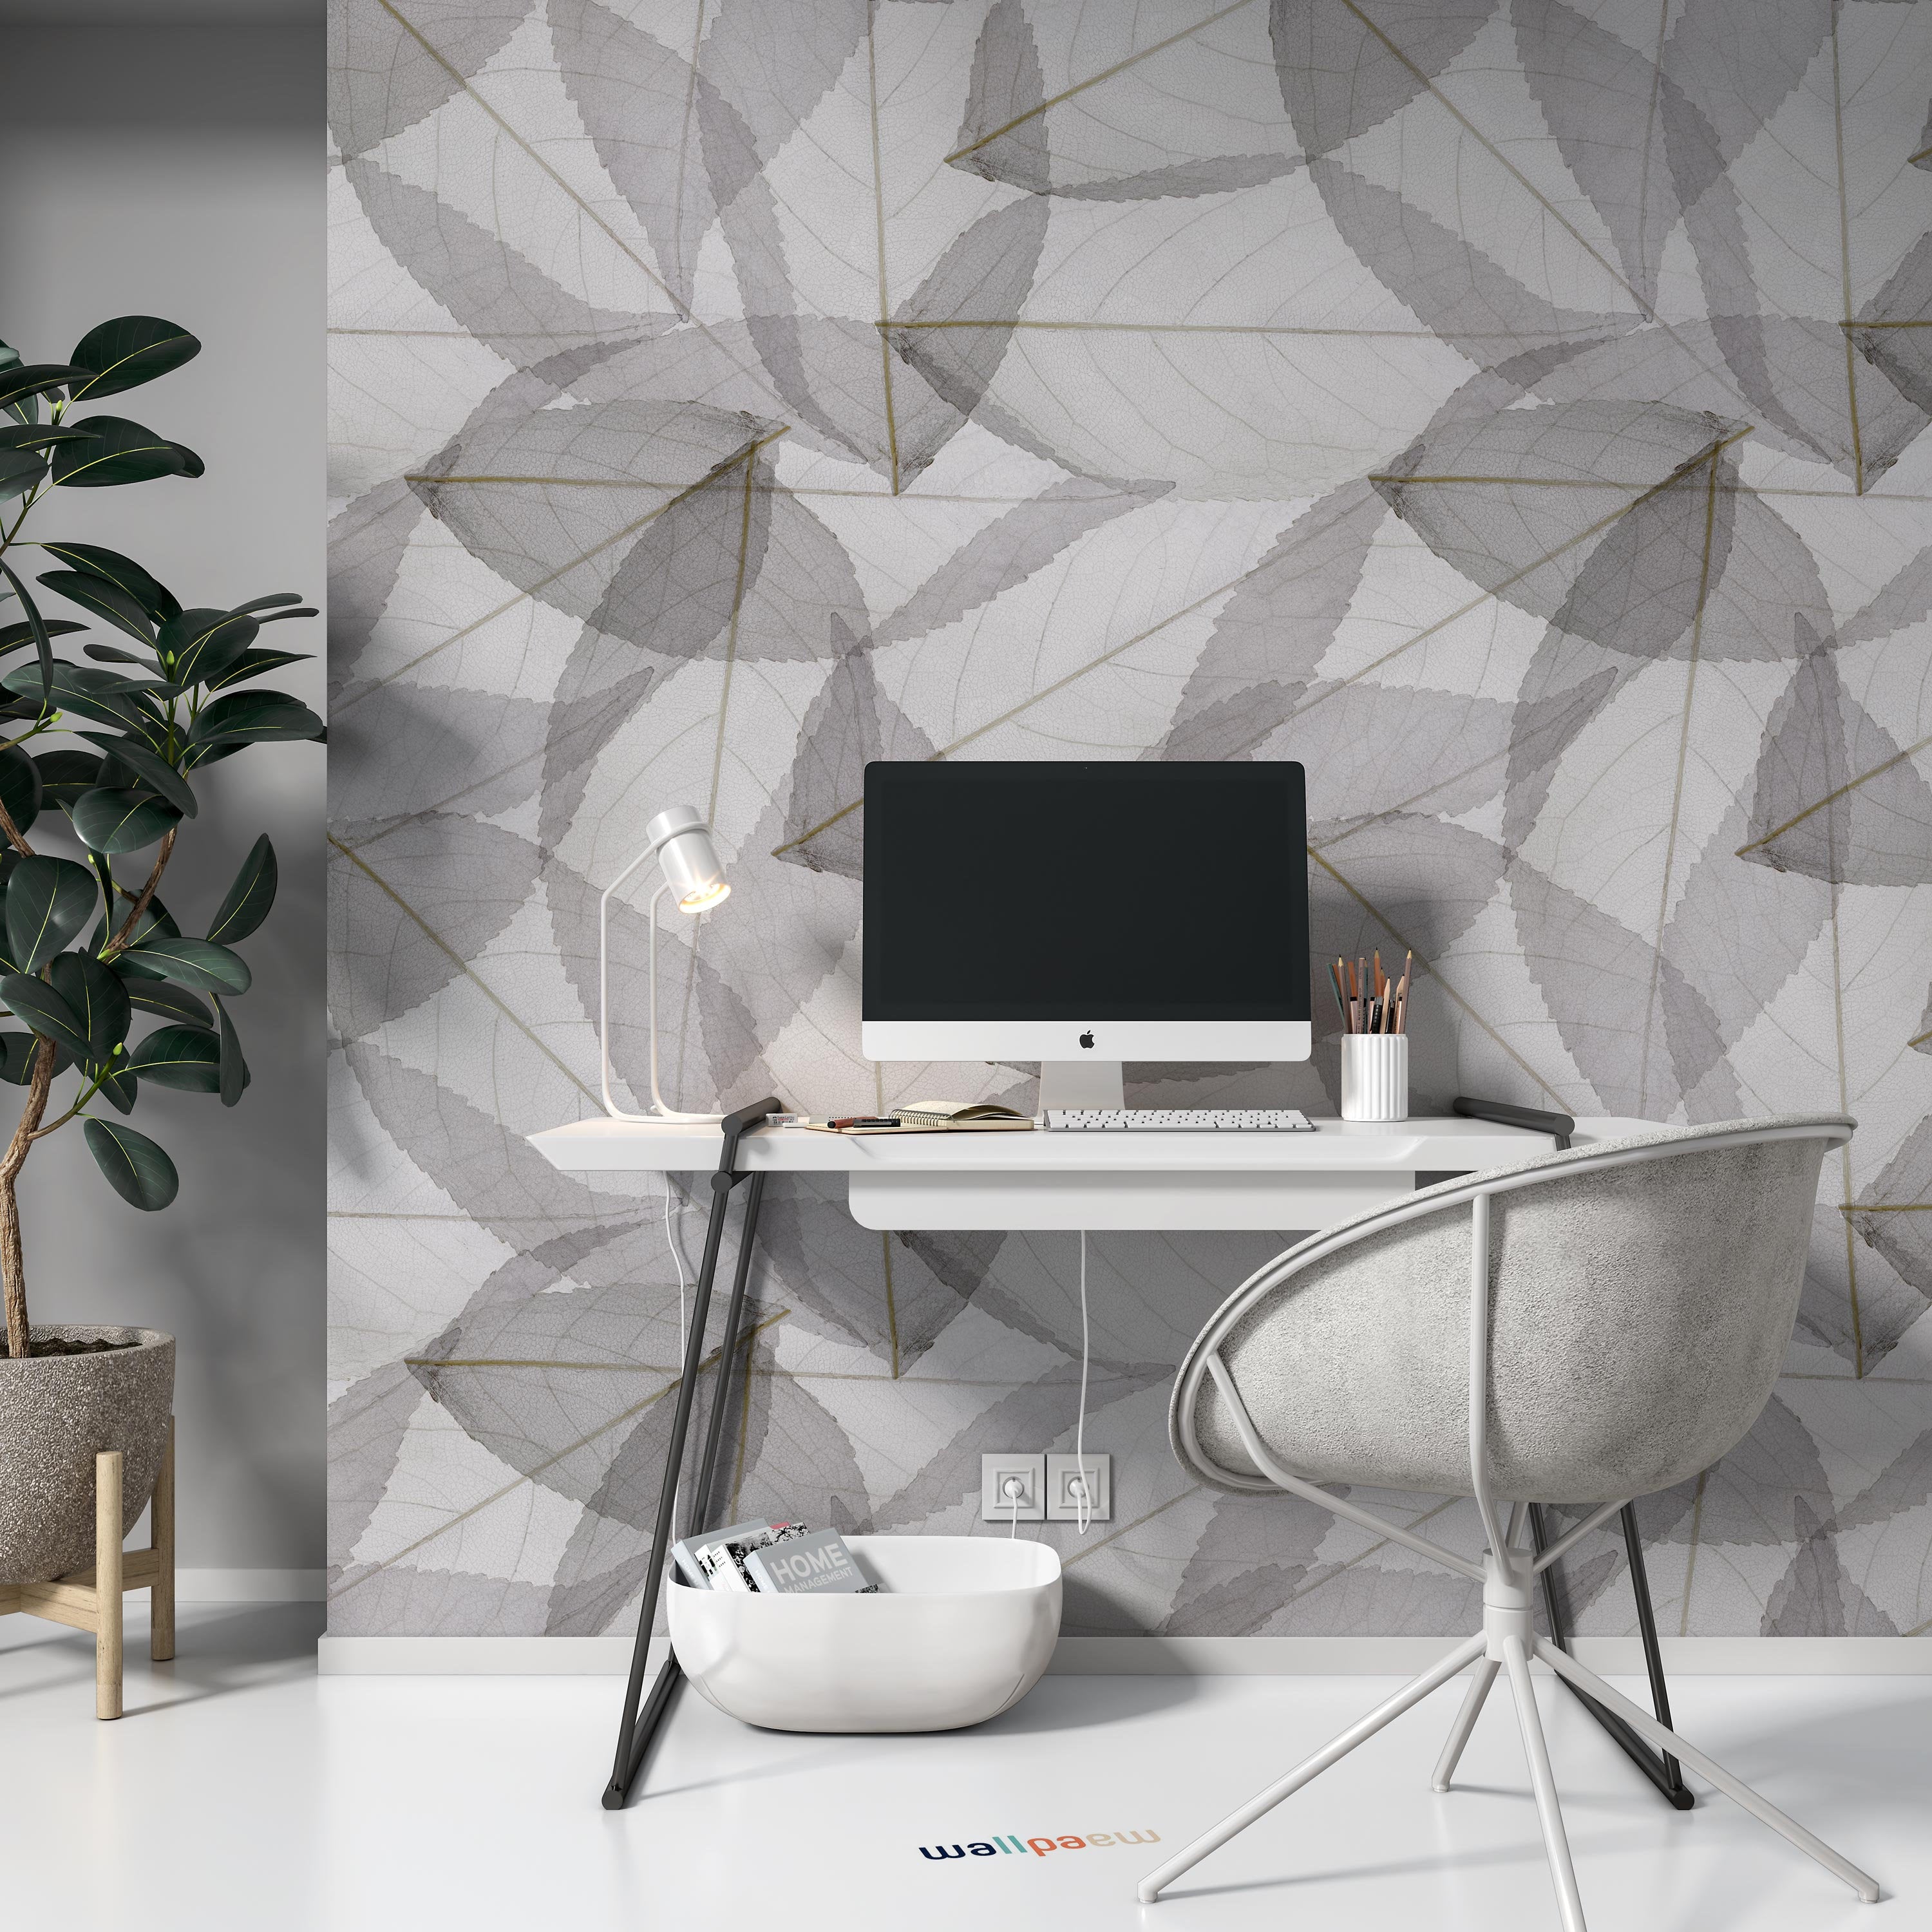 Abstract Gray Leaves Modern Floral Background Wallpaper Cafe Restaurant Decoration Living Room Bedroom Mural Home Decor Wall Art